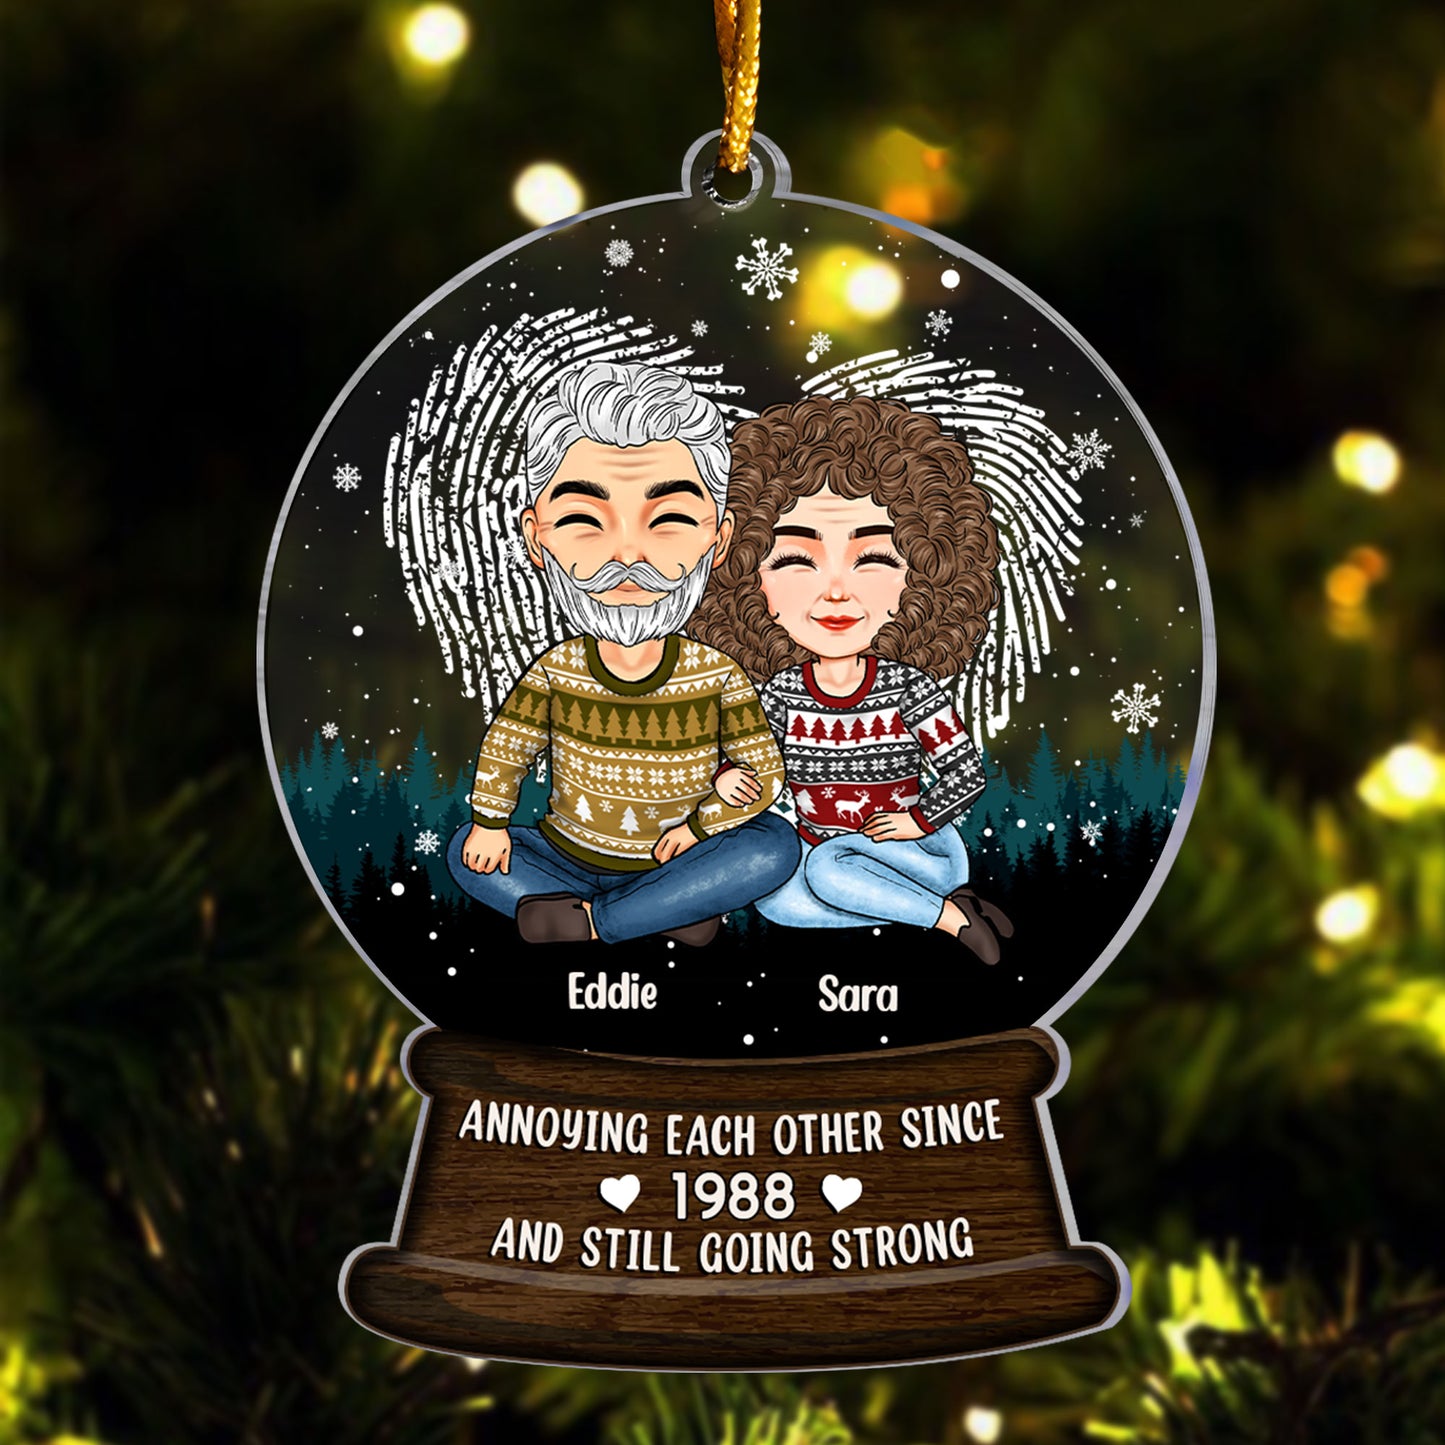 Annoying Each Other Since - Personalized Custom Shaped Acrylic Ornament